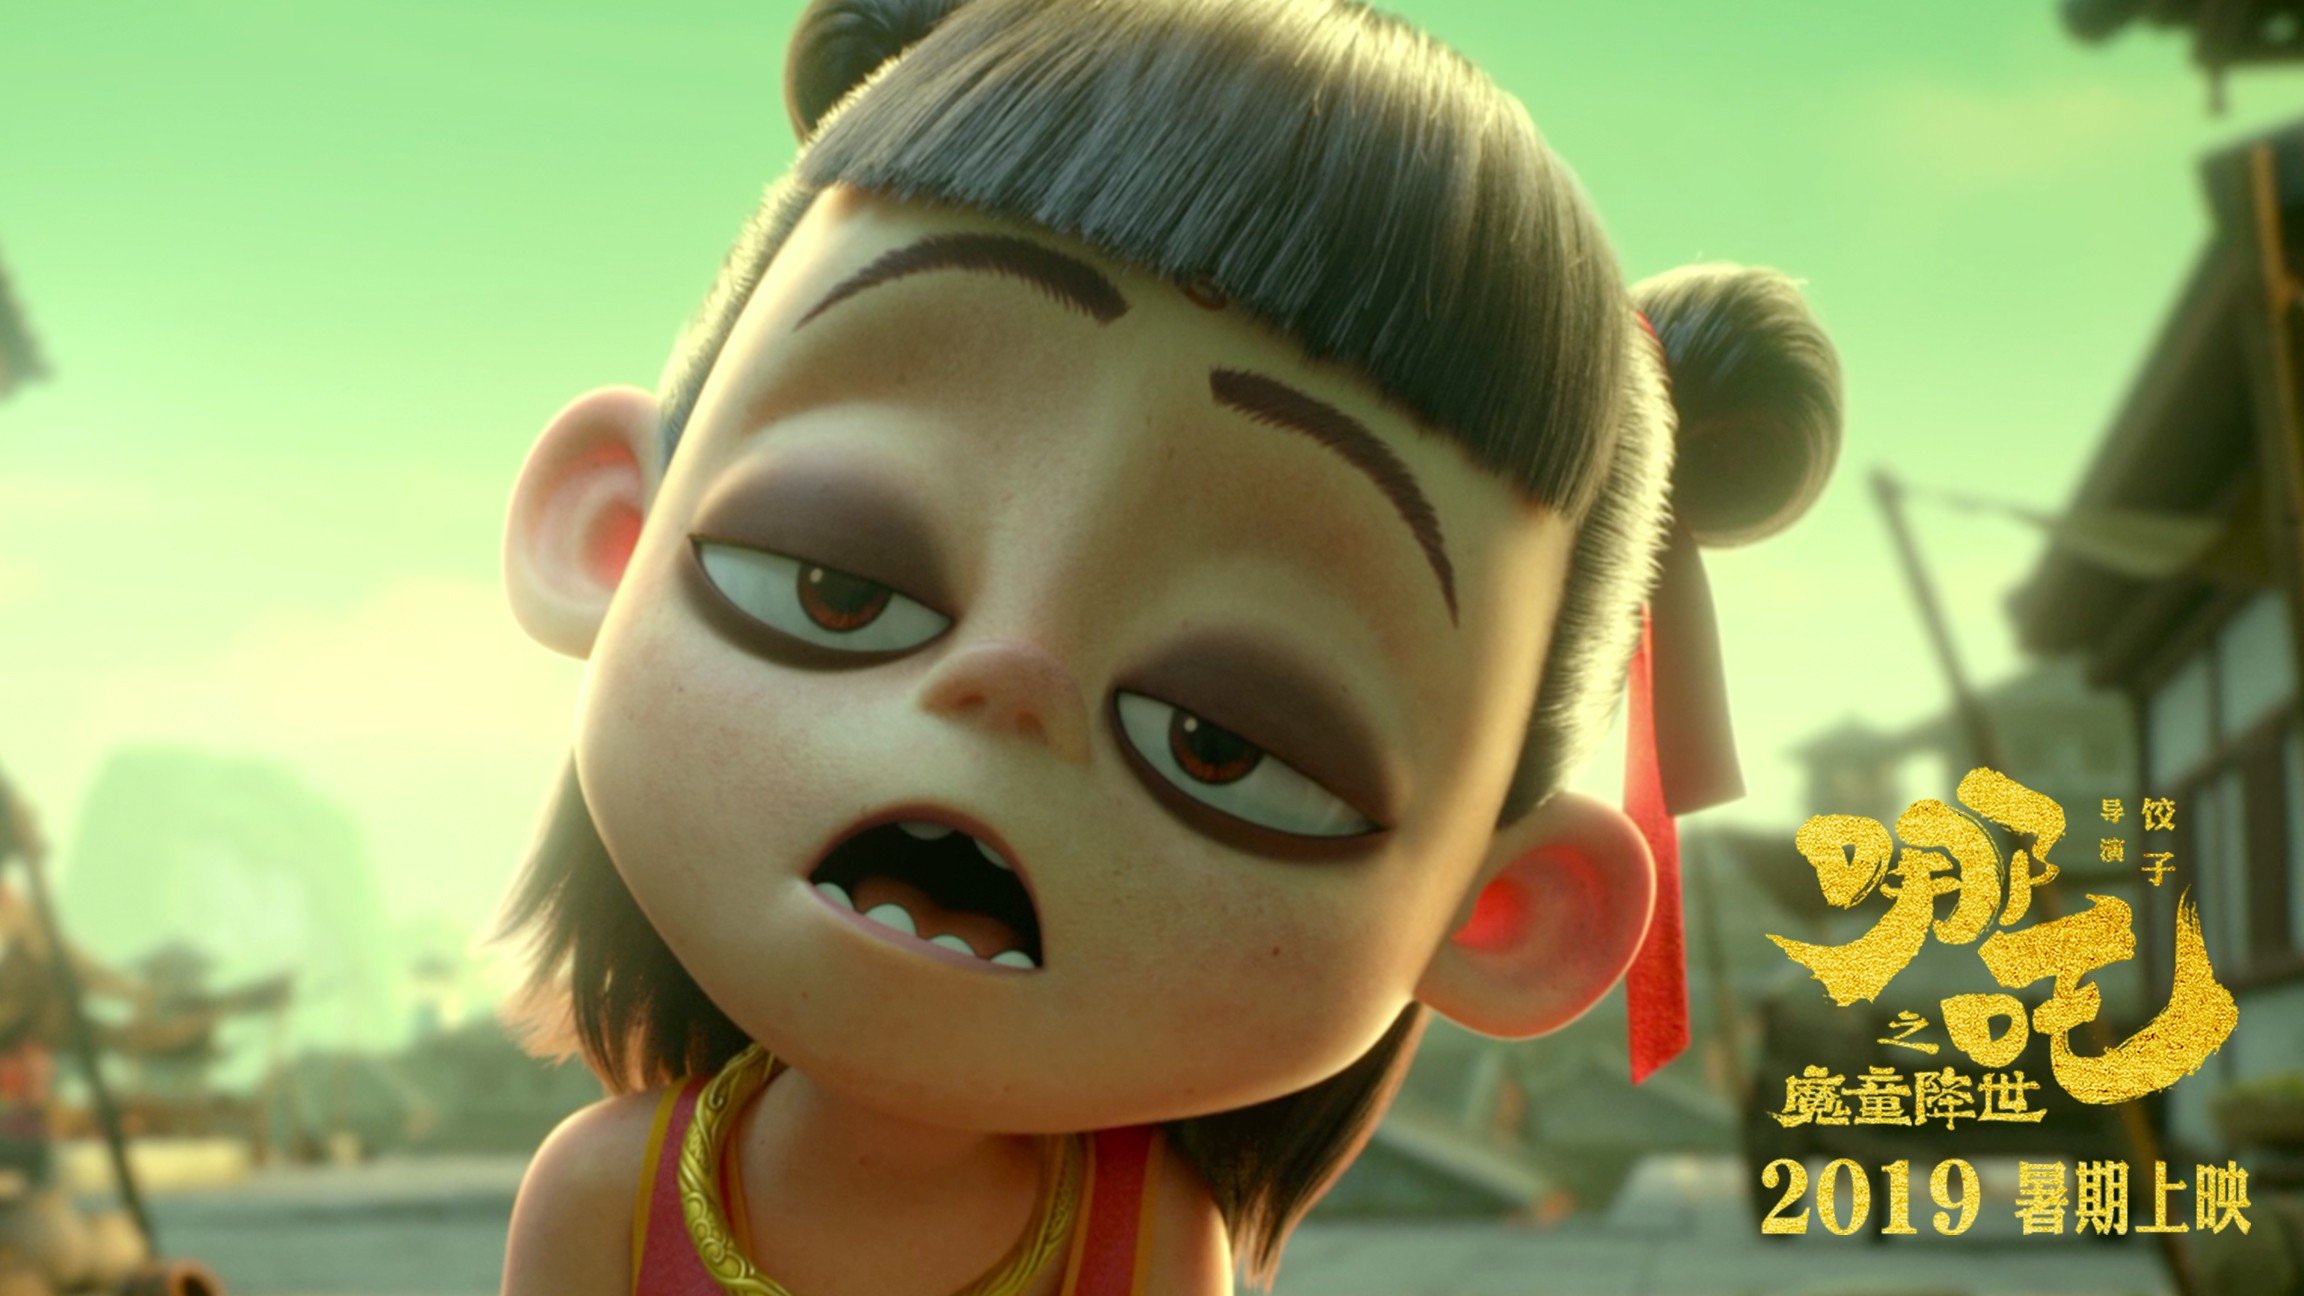 A still from China’s first 3D animated IMAX film, Nezha, which has become the fourth highest grossing film in Chinese box office history. It is the feature film debut of its director, Yang Yu, known as Jiaozi (Dumpling).